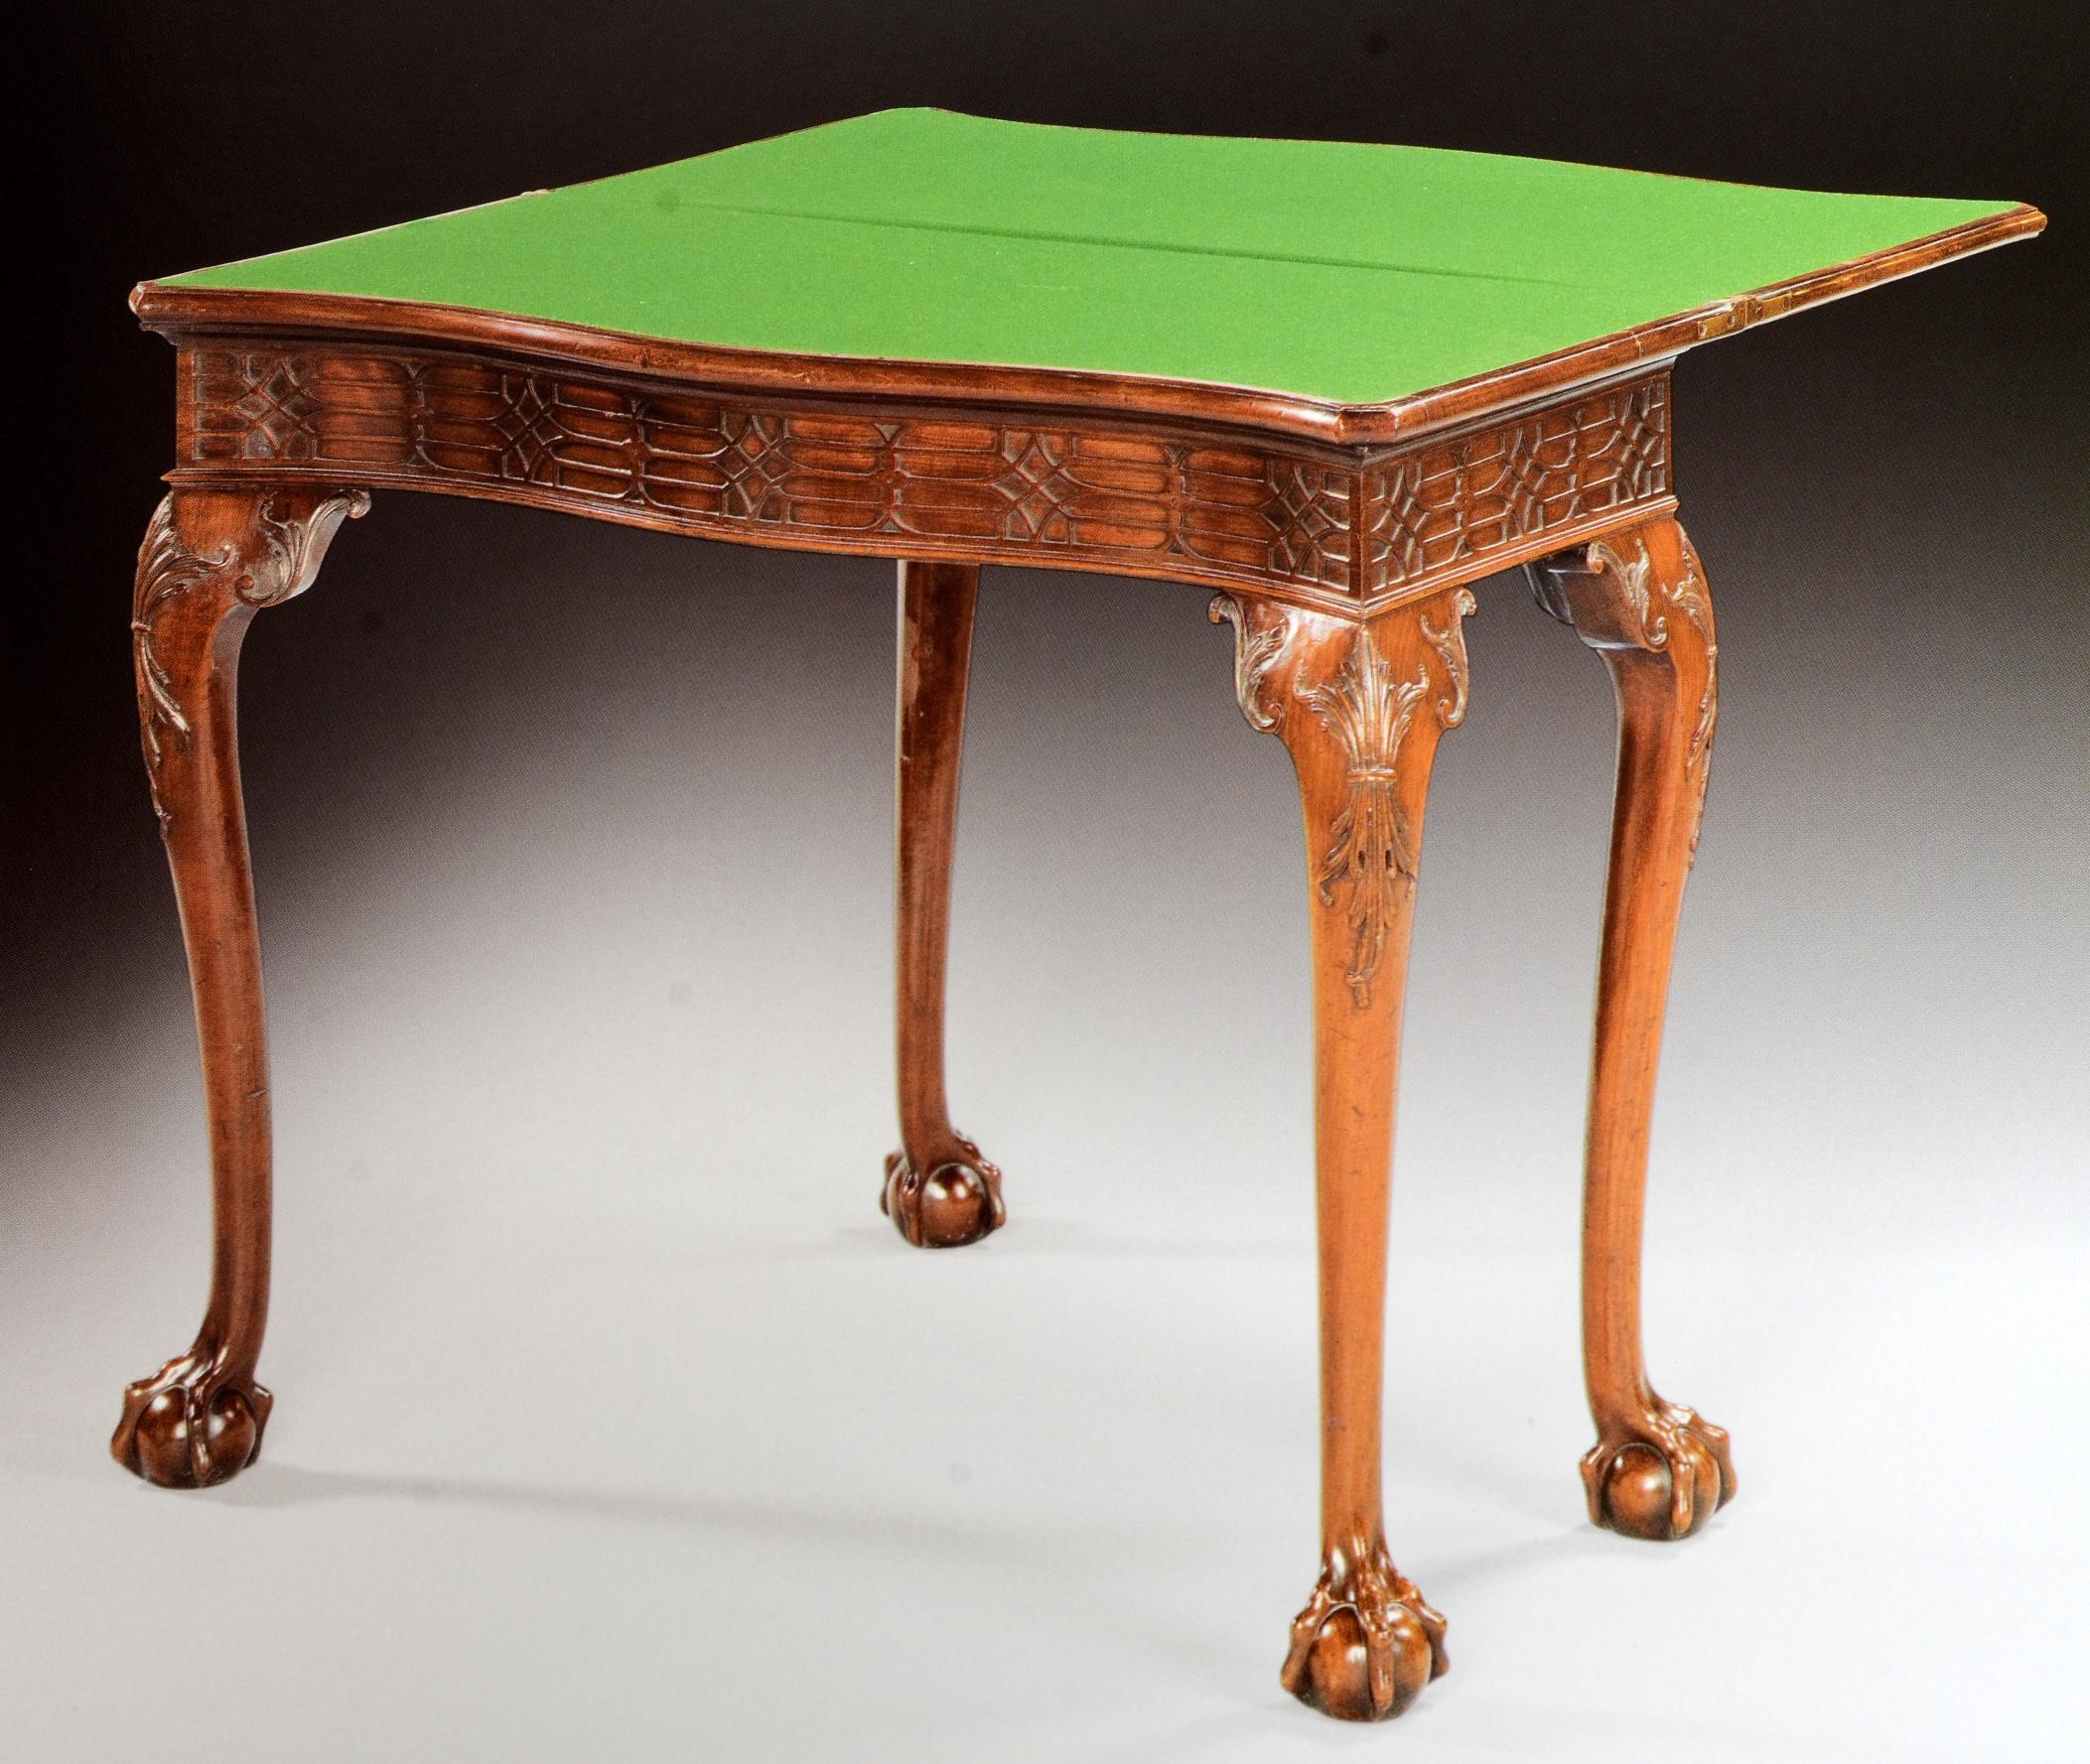 Paper Exceptional Furniture & Works of Art by Mallett & Son Antiques, First Edition For Sale